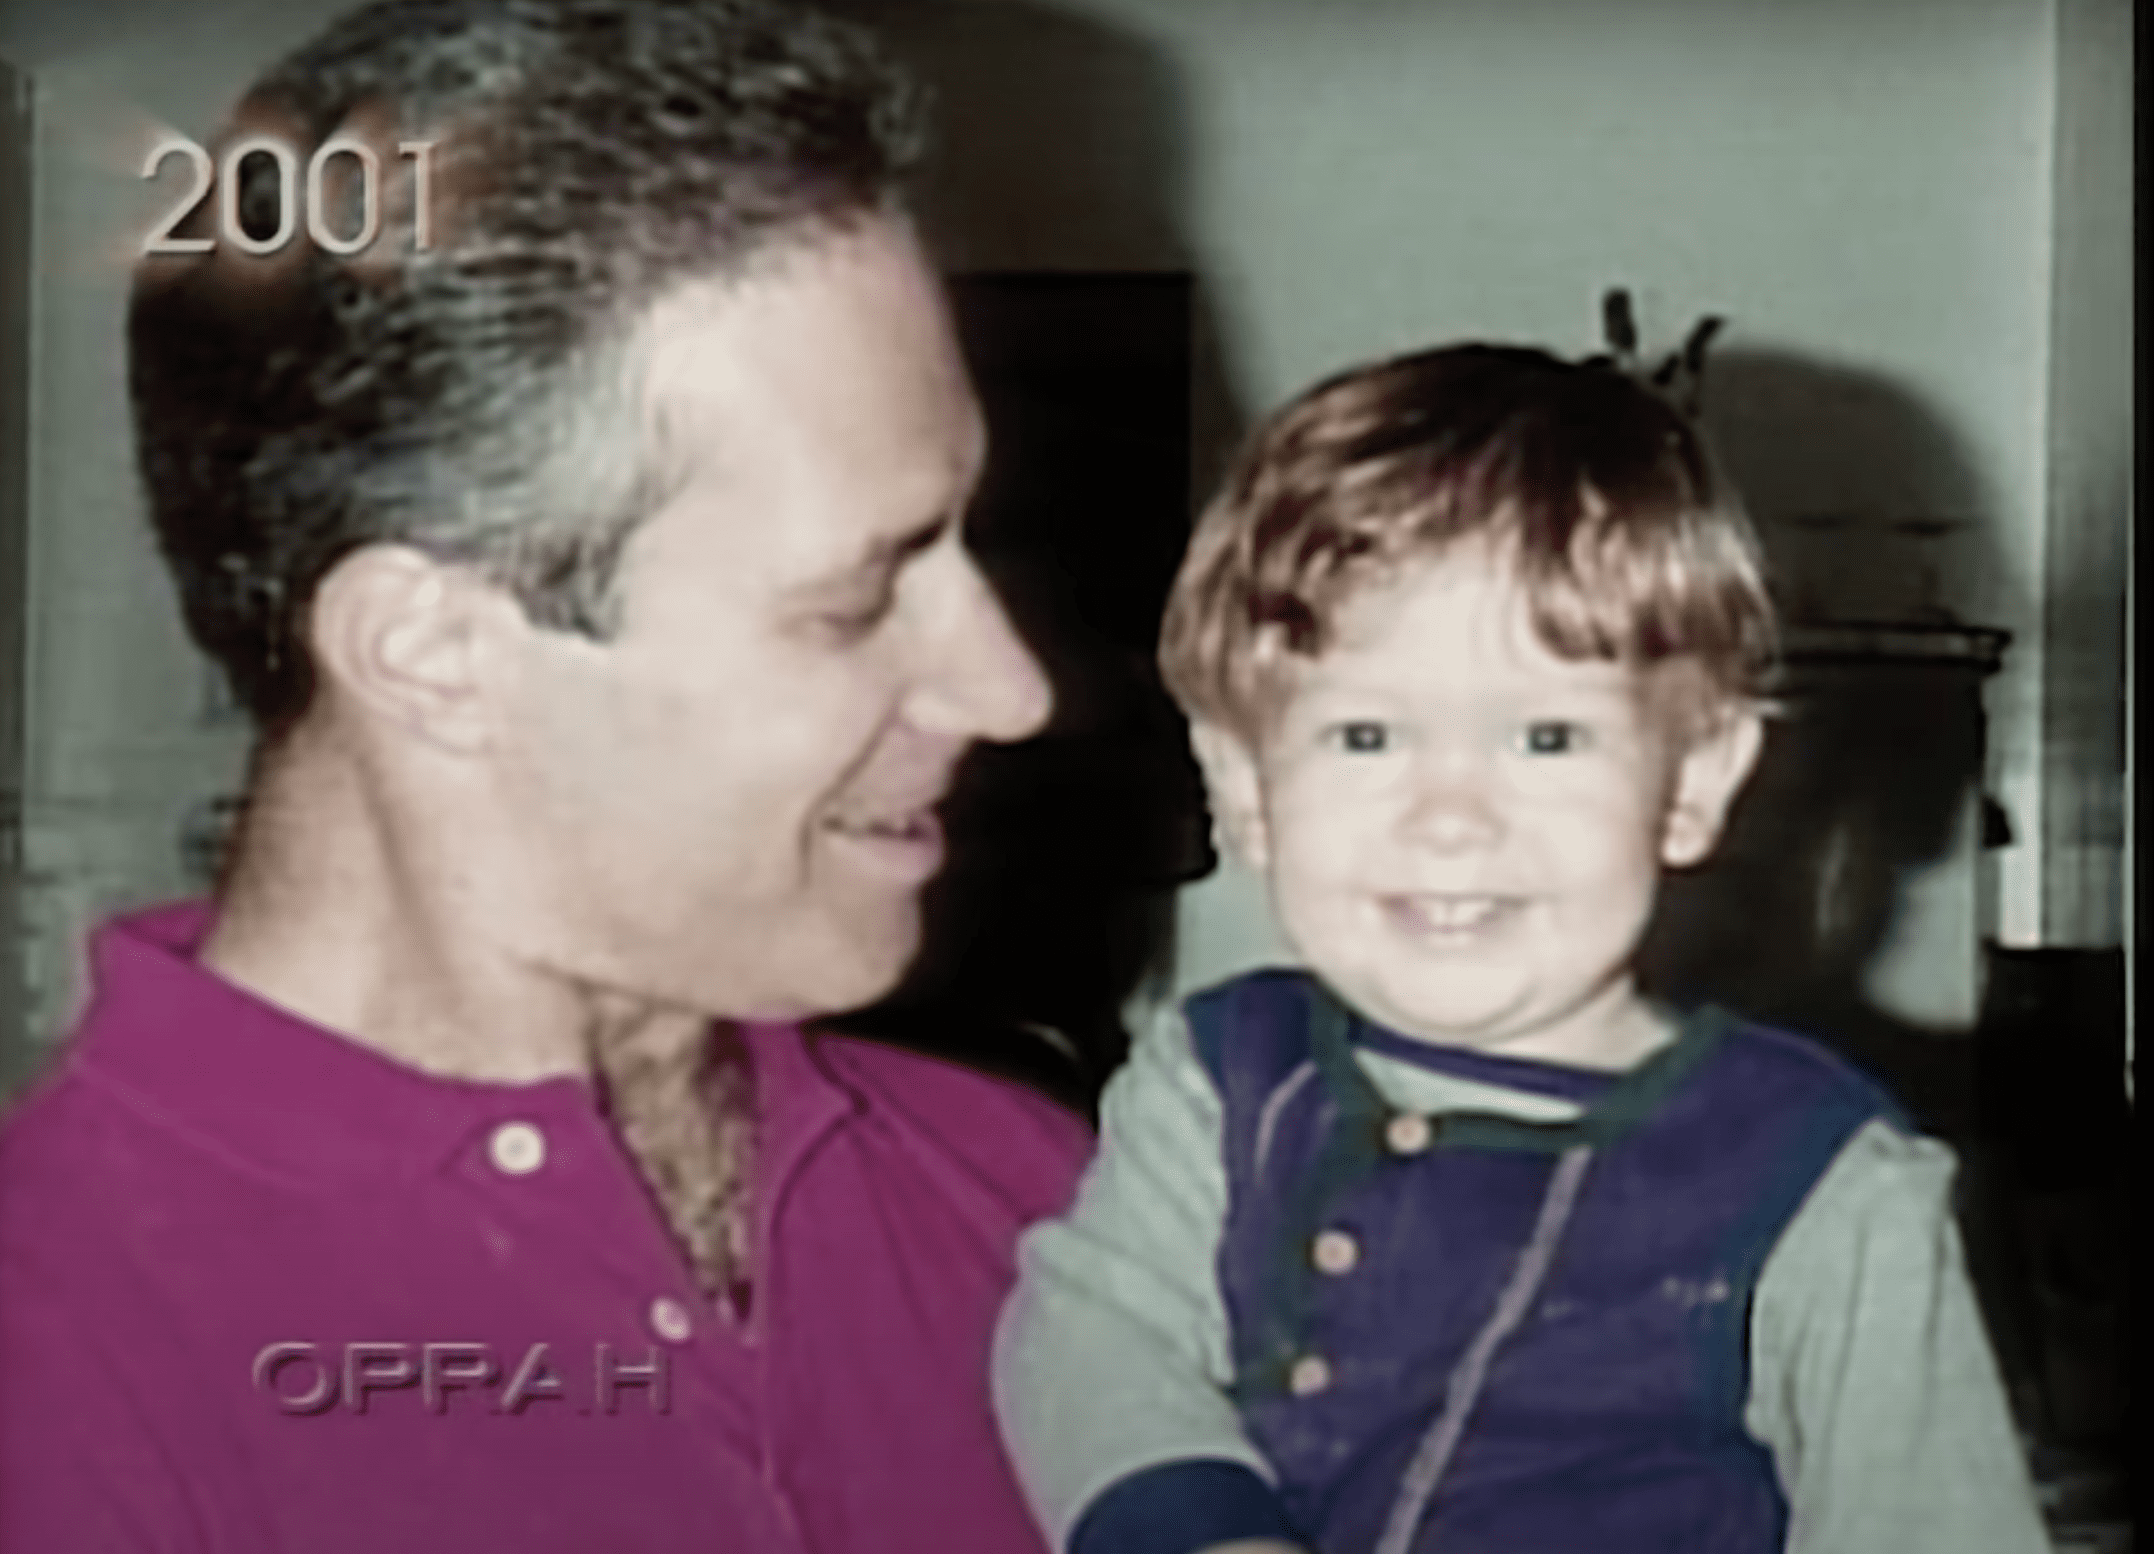 Ben Goeller pictured holding his son, Bryan. | Source: youtube.com/OWN